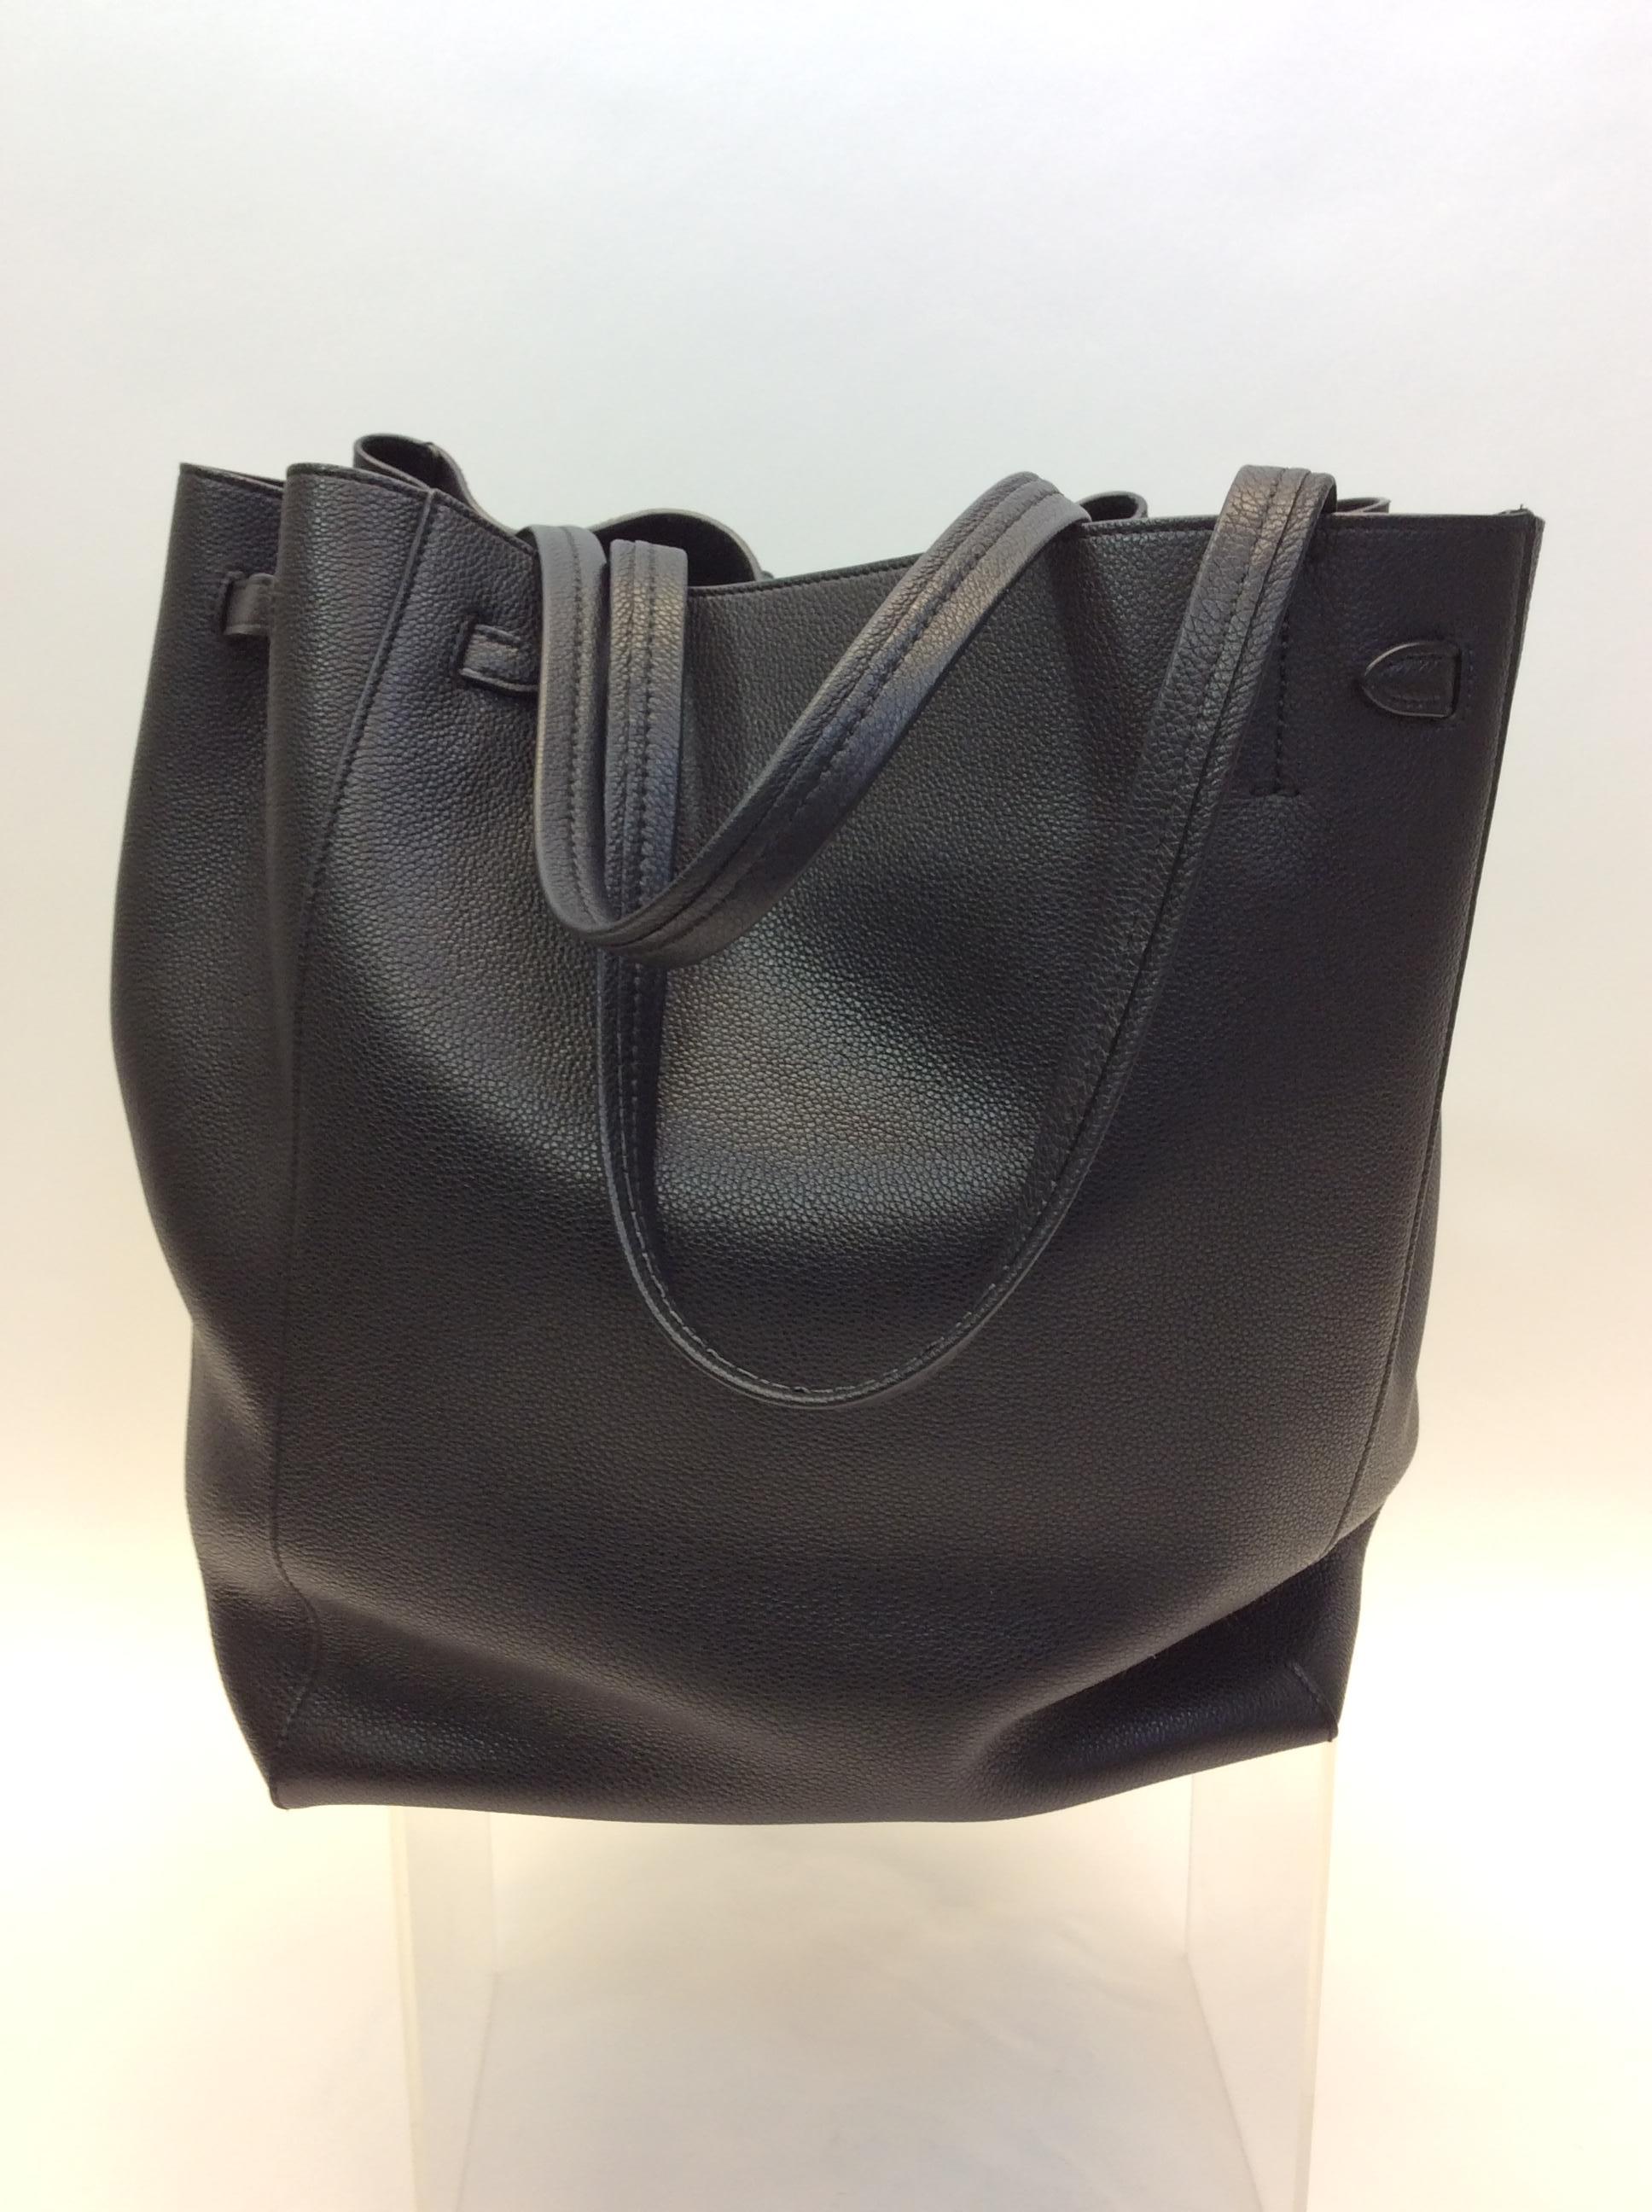 Celine Cabas Black Leather Tote In Excellent Condition For Sale In Narberth, PA